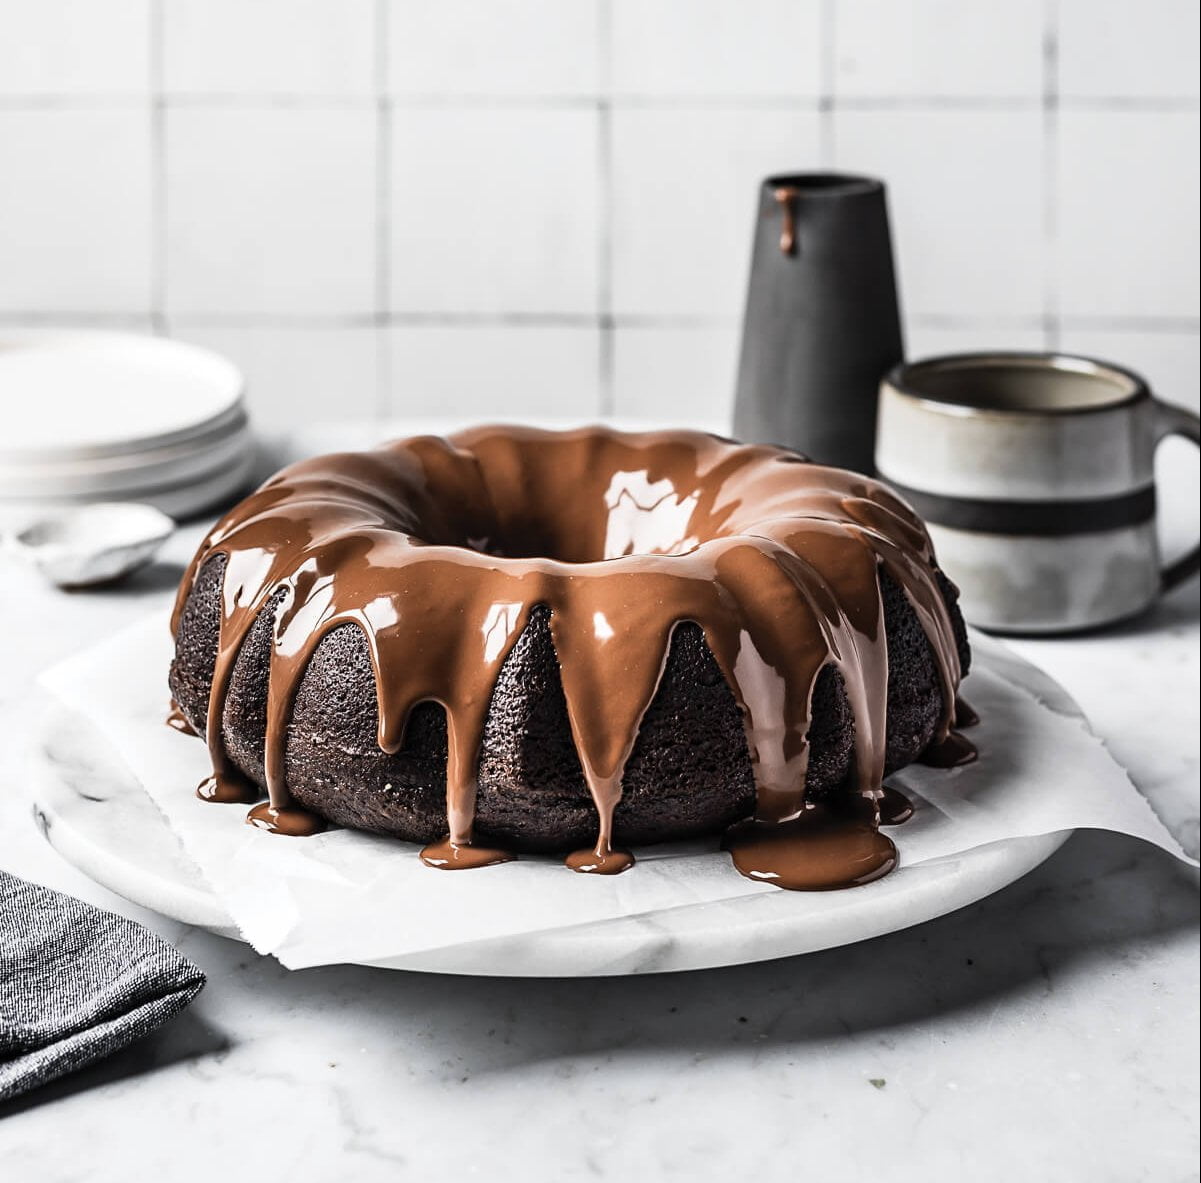 A bundt cake with chocolate drizzled over the top